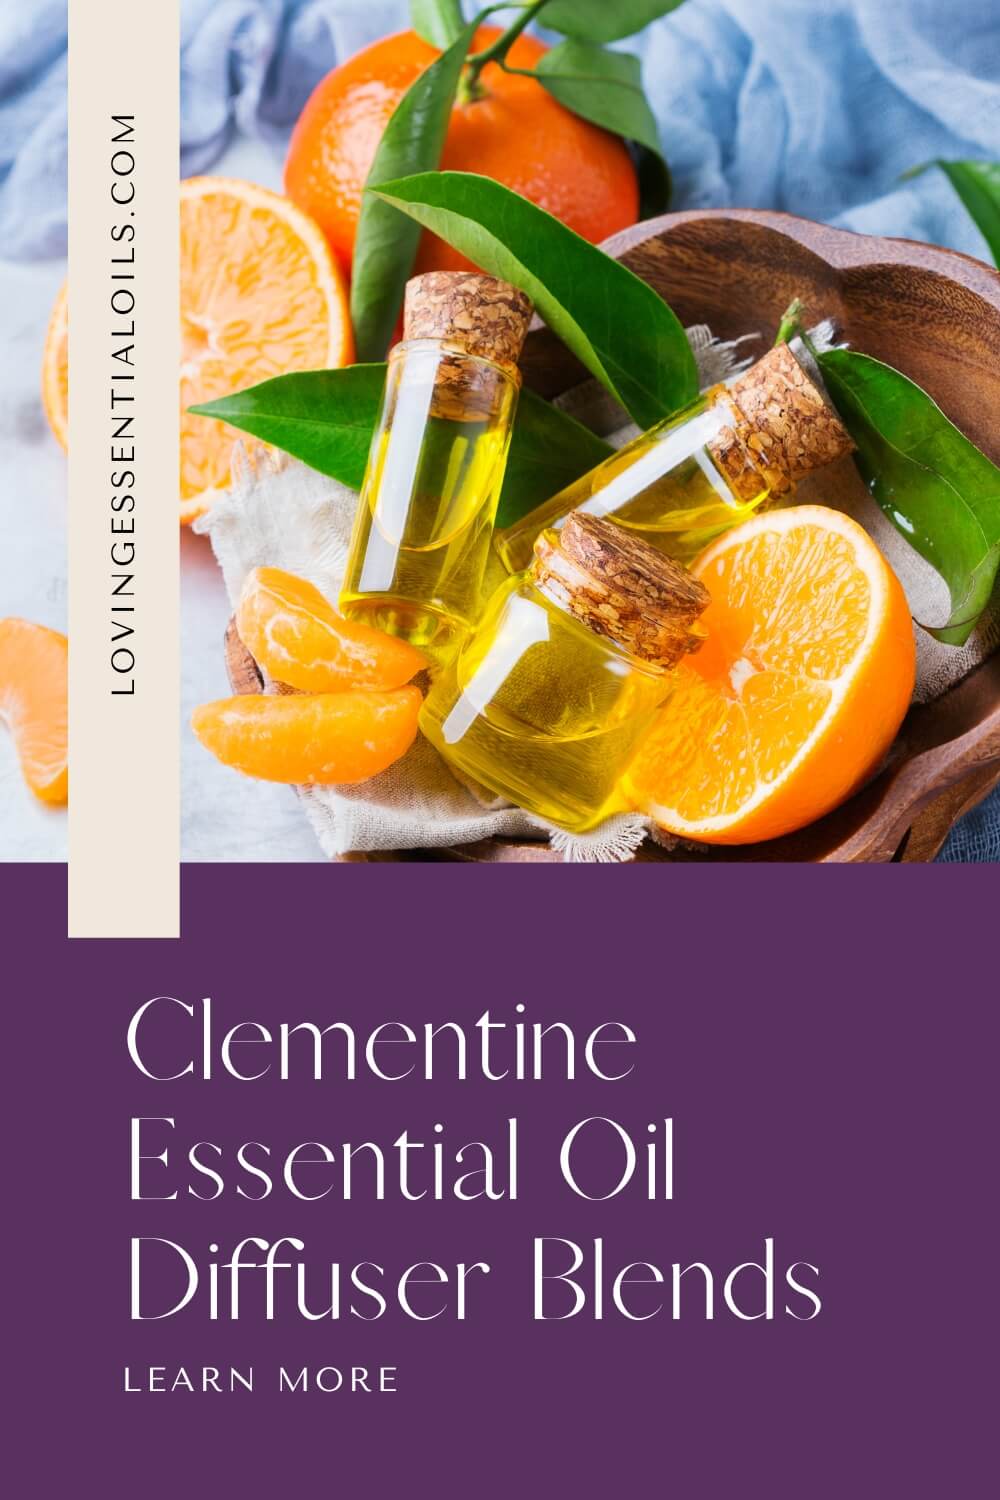 Clementine Essential Oil Diffuser Blends